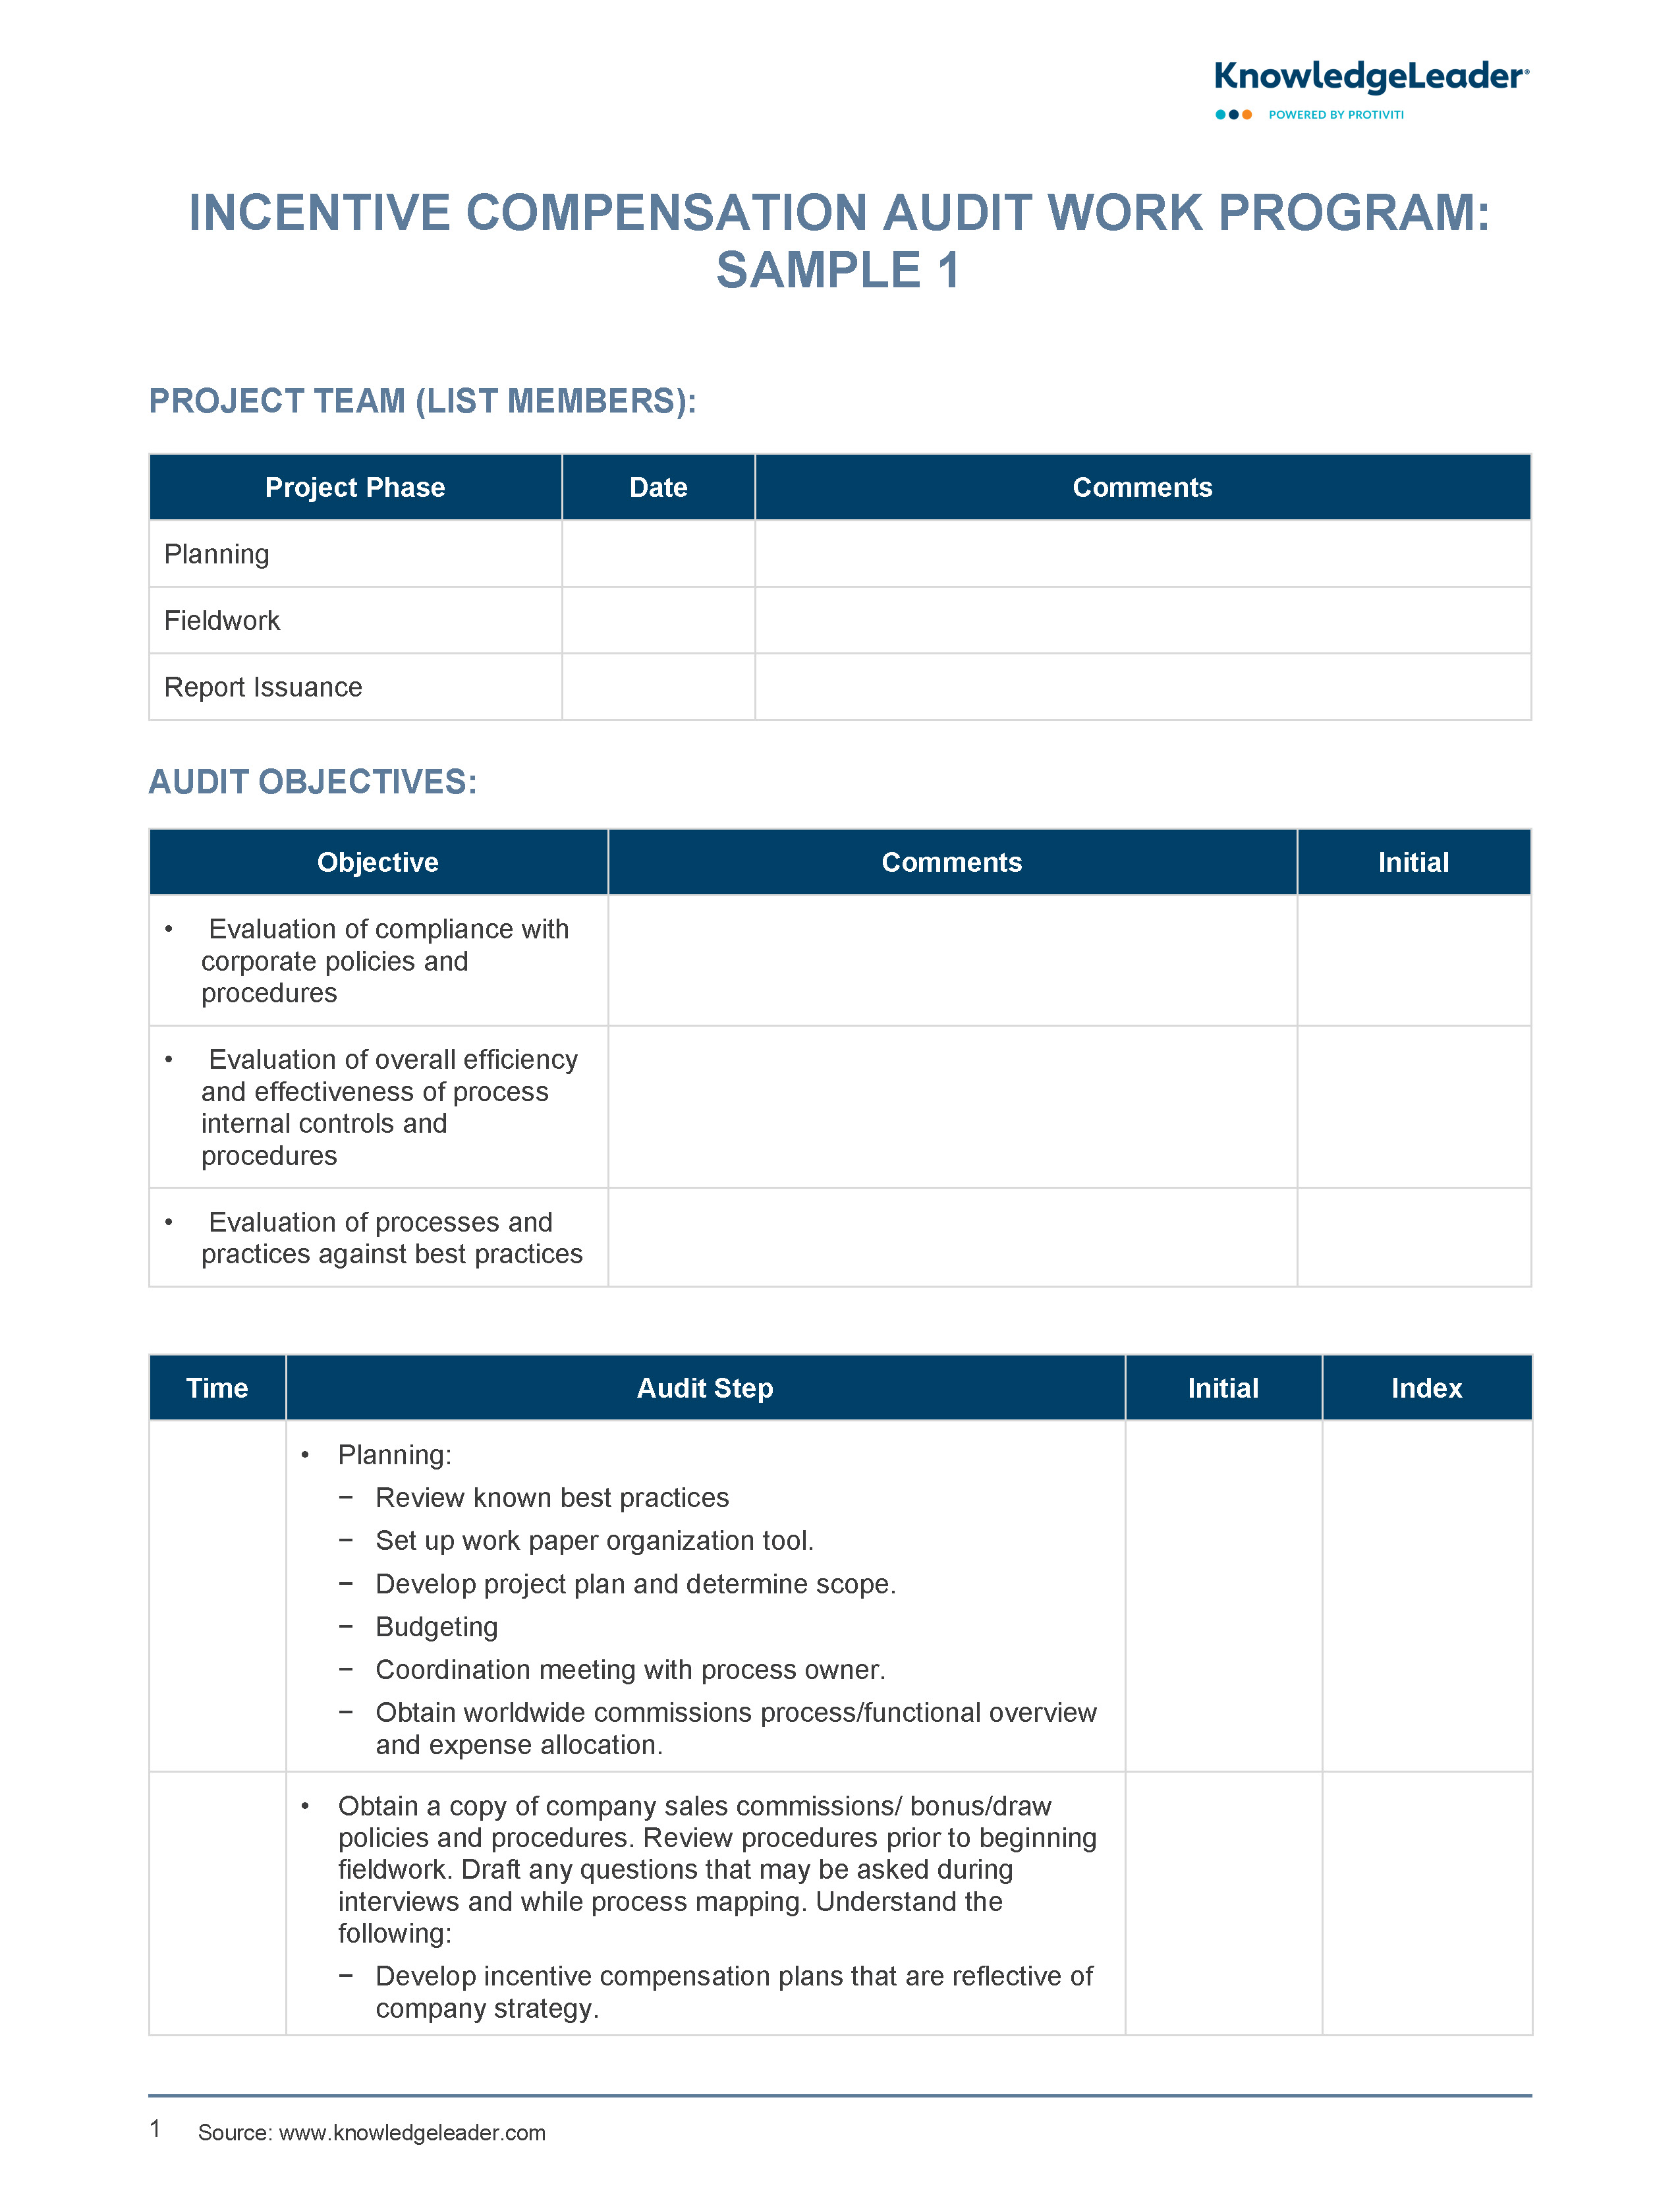 Screenshot of the first page of Incentive Compensation Audit Work Program